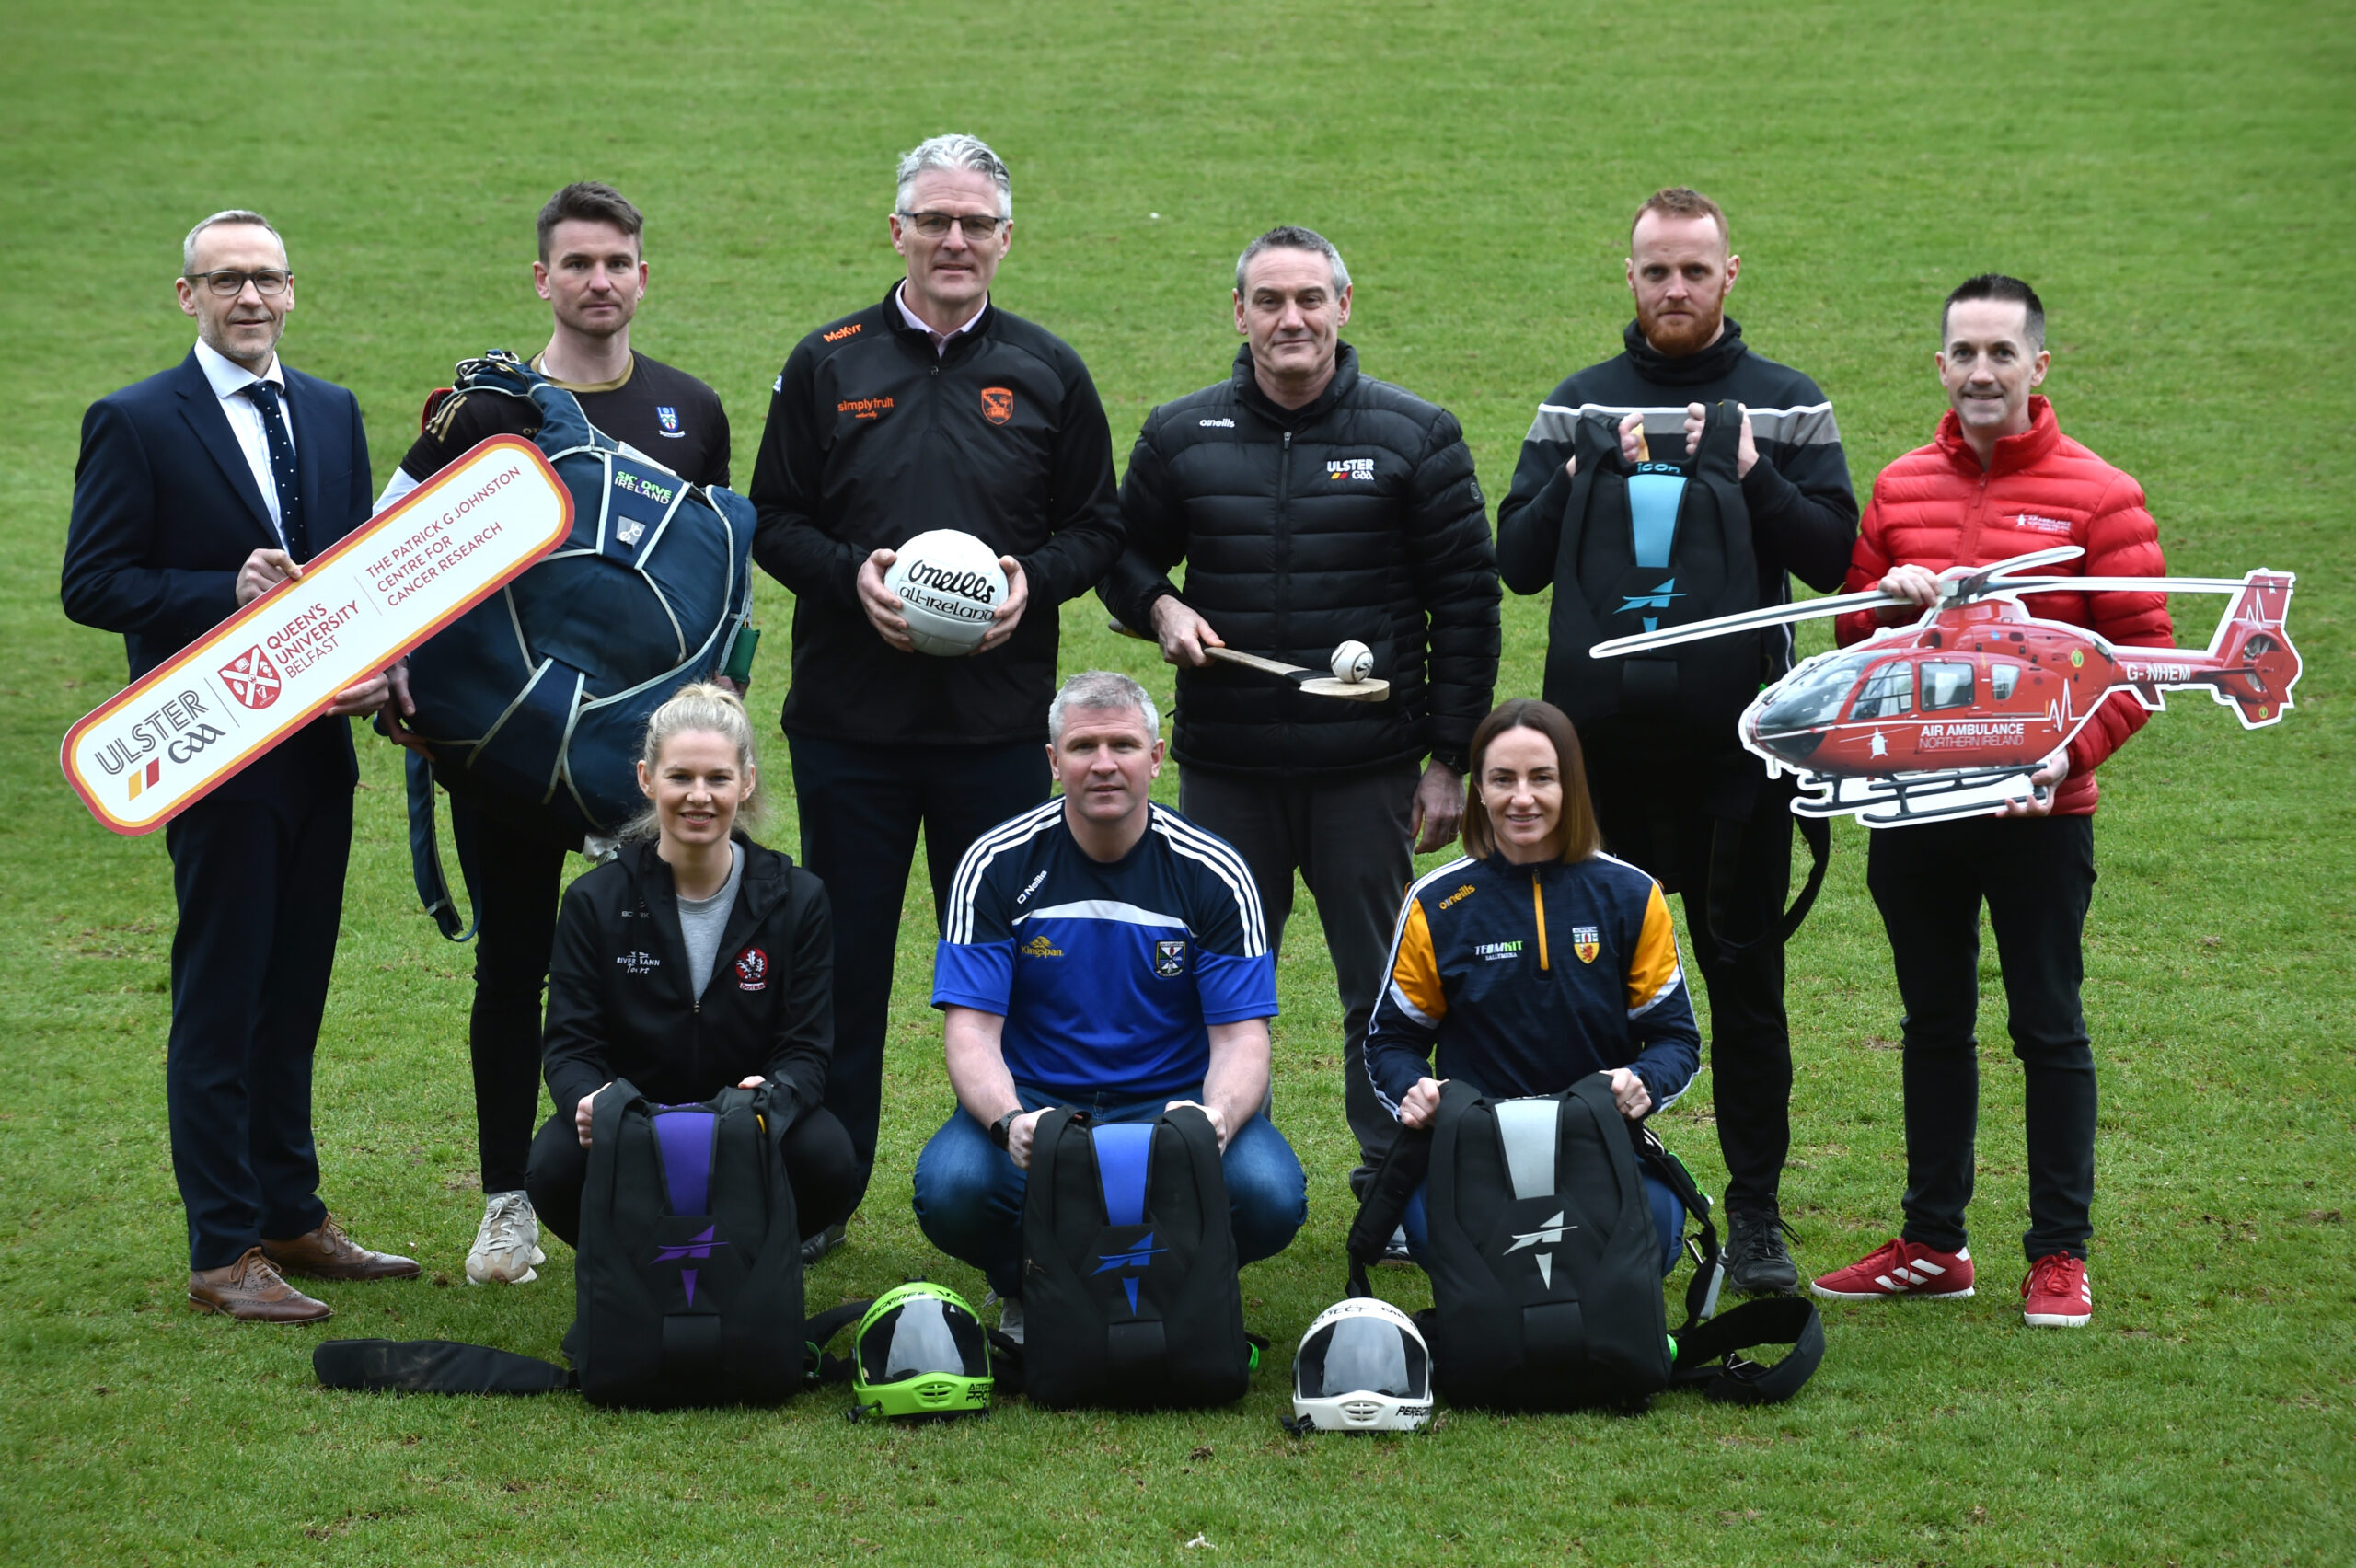 Excitement building for Ulster GAA charity skydive